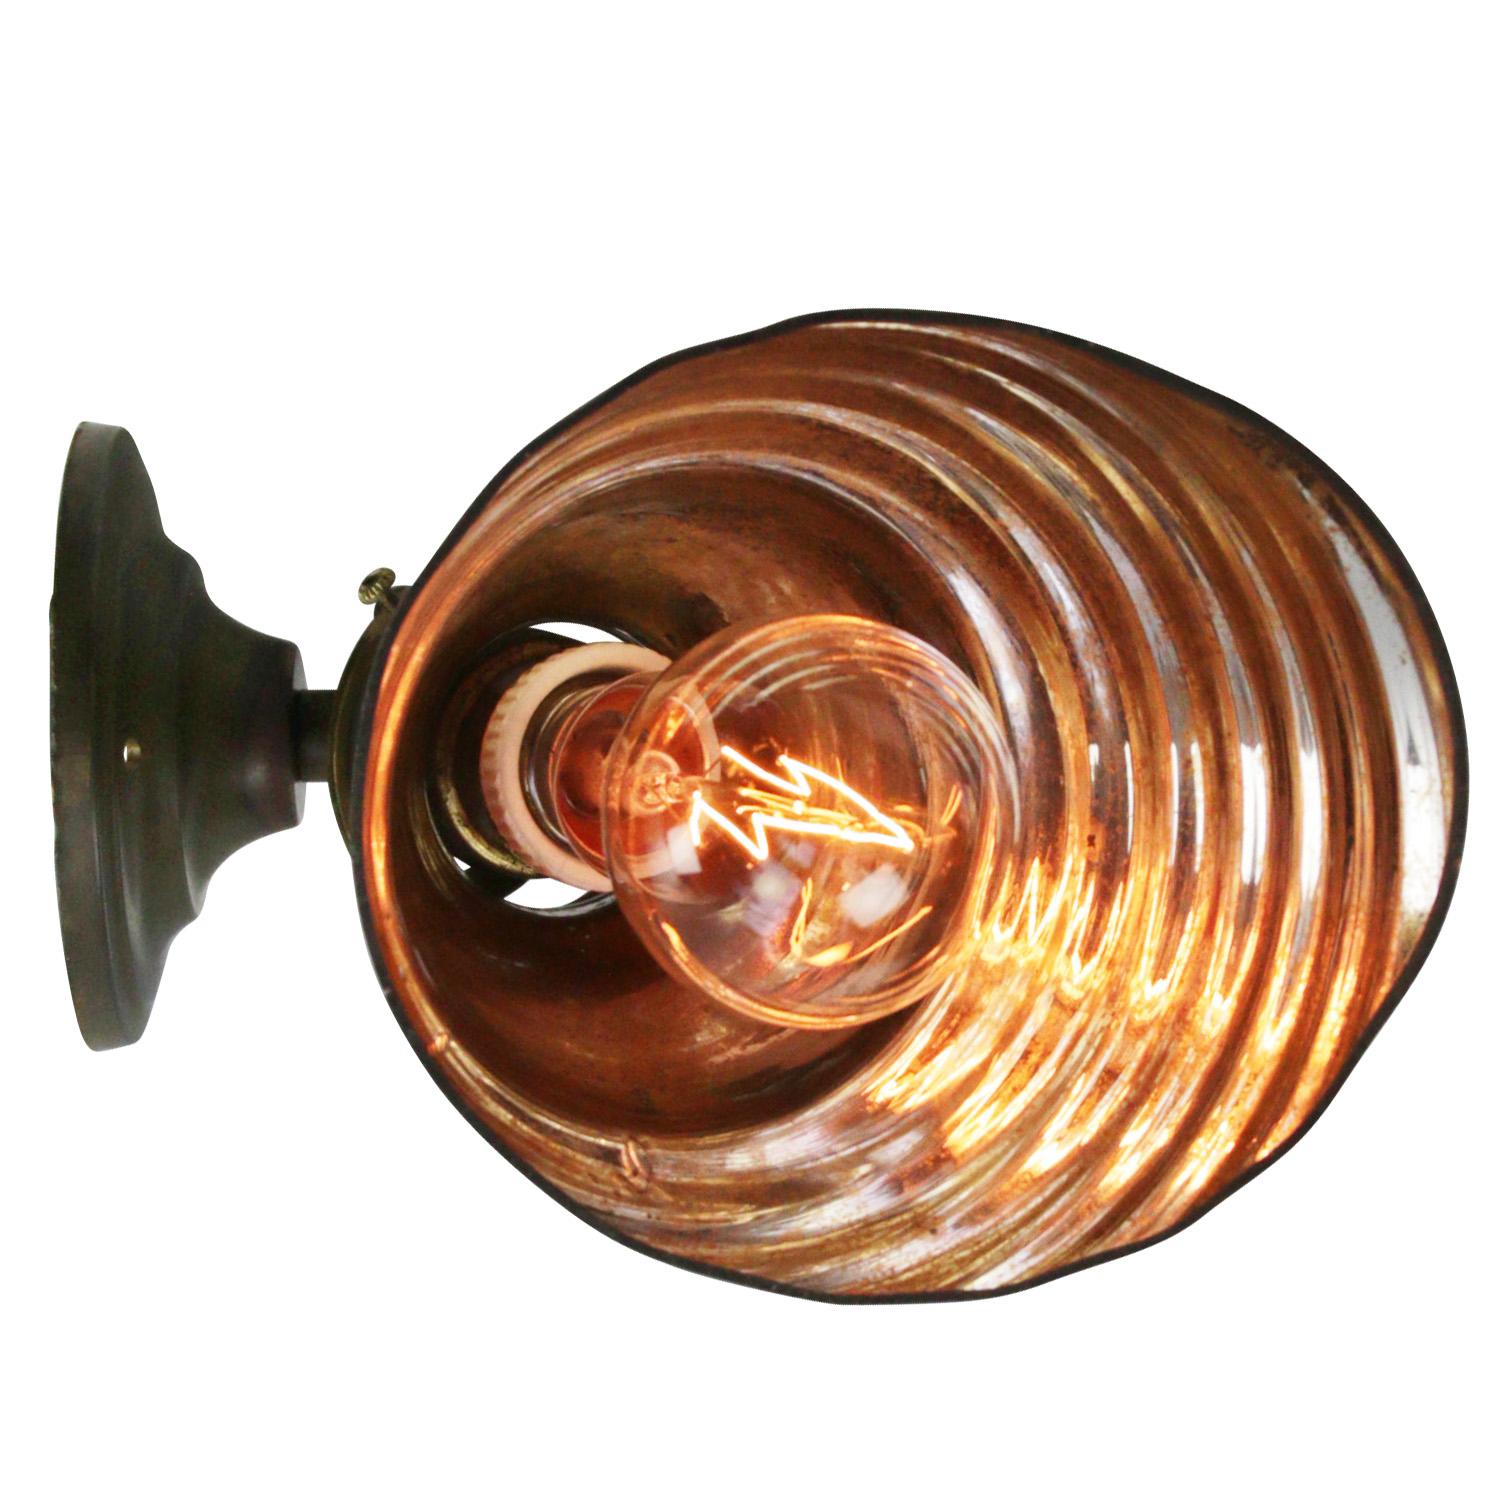 Mercury glass wall lamp
Metal base with mirror glass shade

Measures: Diameter wall mount 10 cm

Weight: 0.50 kg / 1.1 lb

Priced per individual item. All lamps have been made suitable by international standards for incandescent light bulbs,